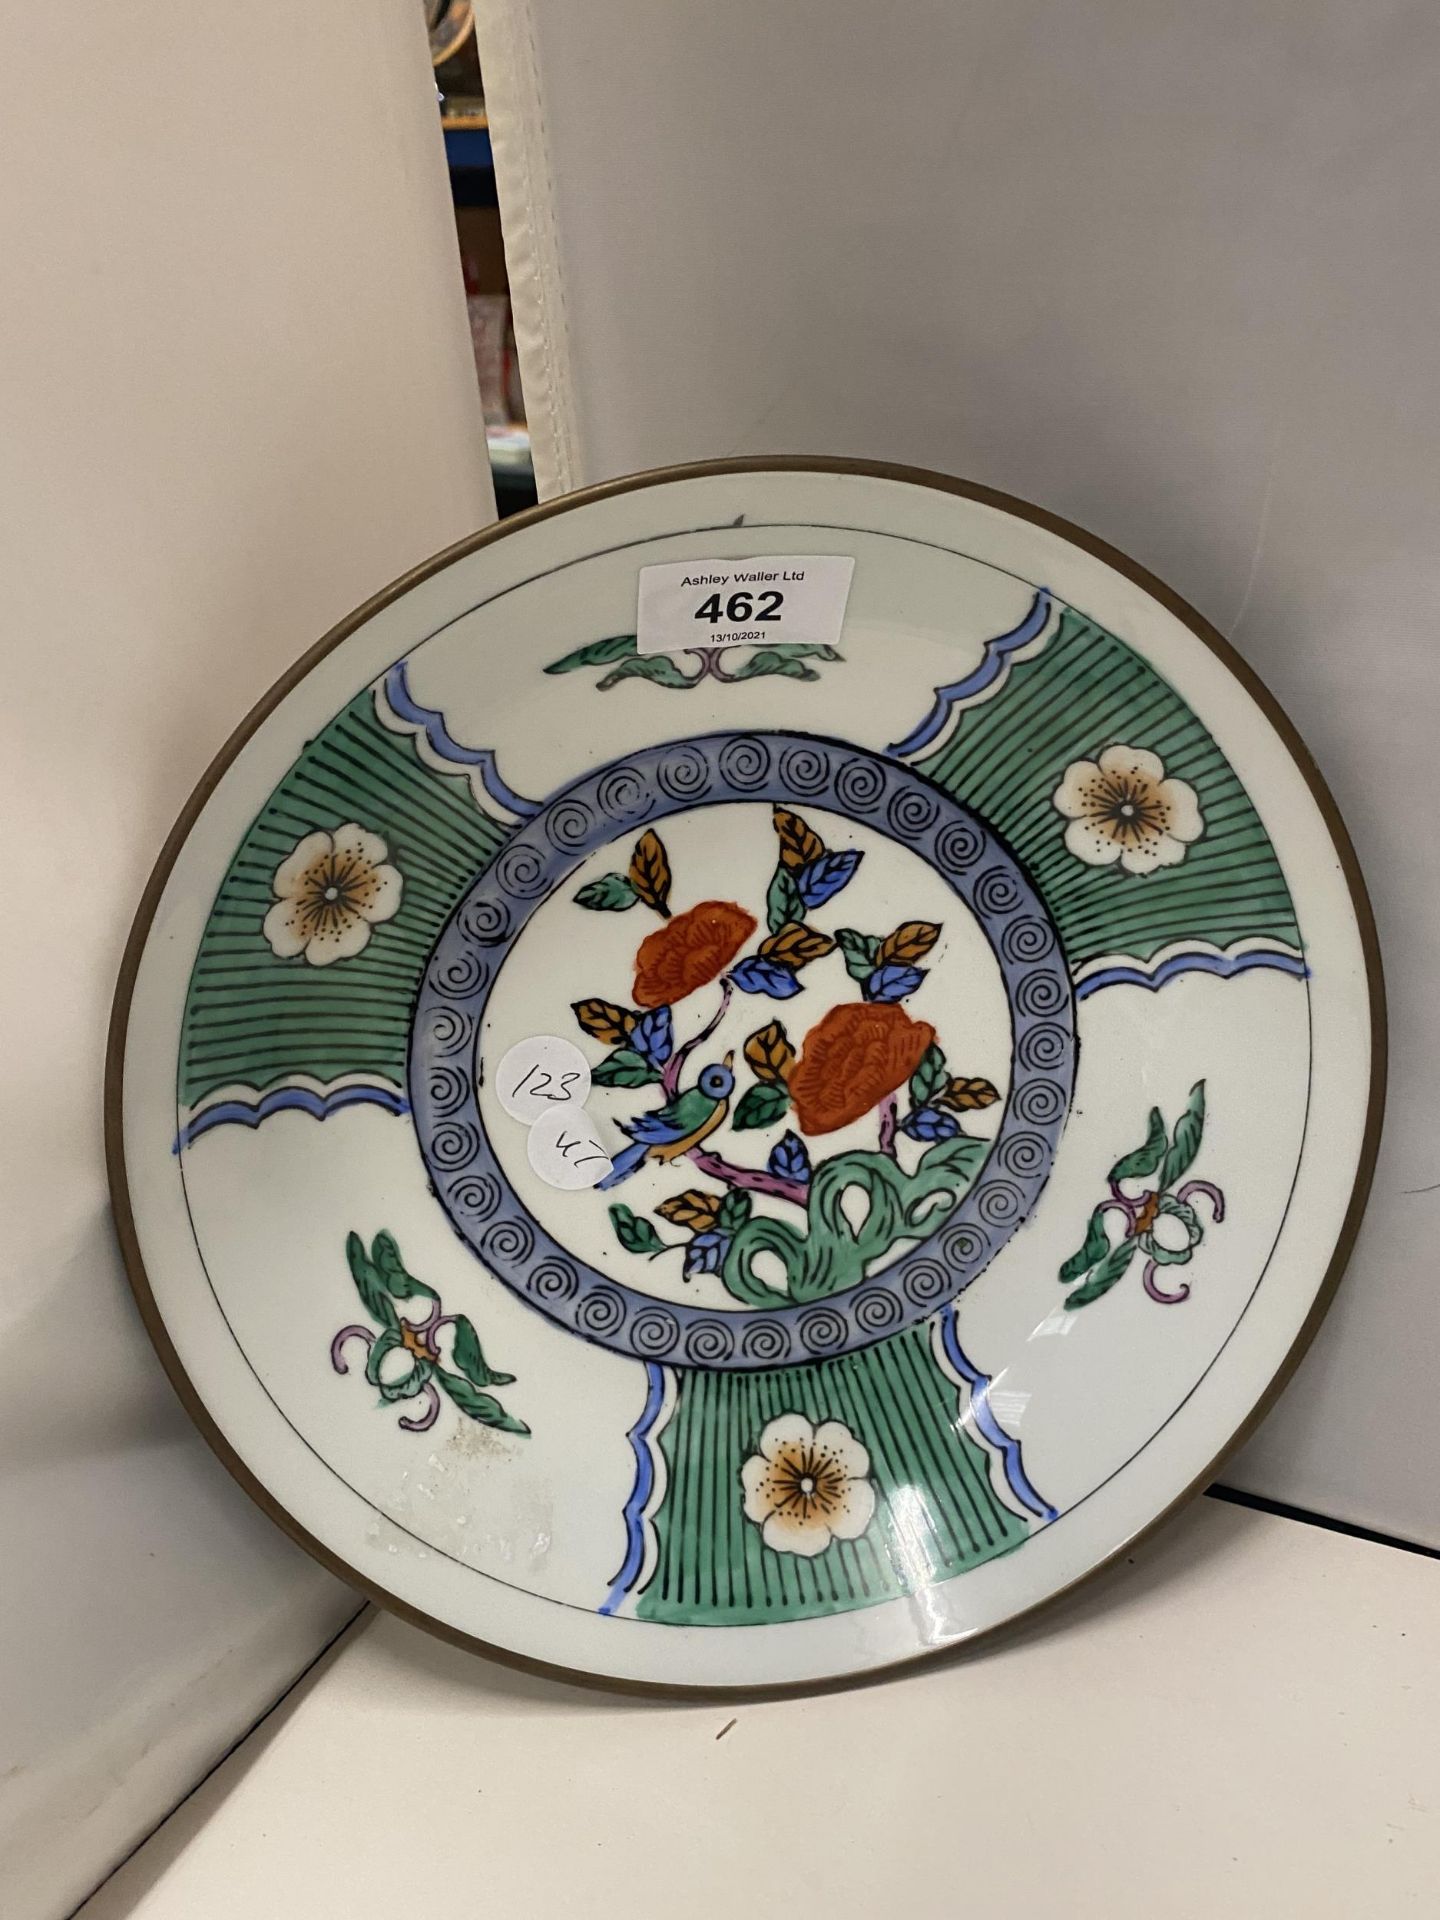 AN ORIENTAL STYLE BOWL WITH A PATTERN OF BIRDS AND FLOWERS SIGNED TO THE BASE